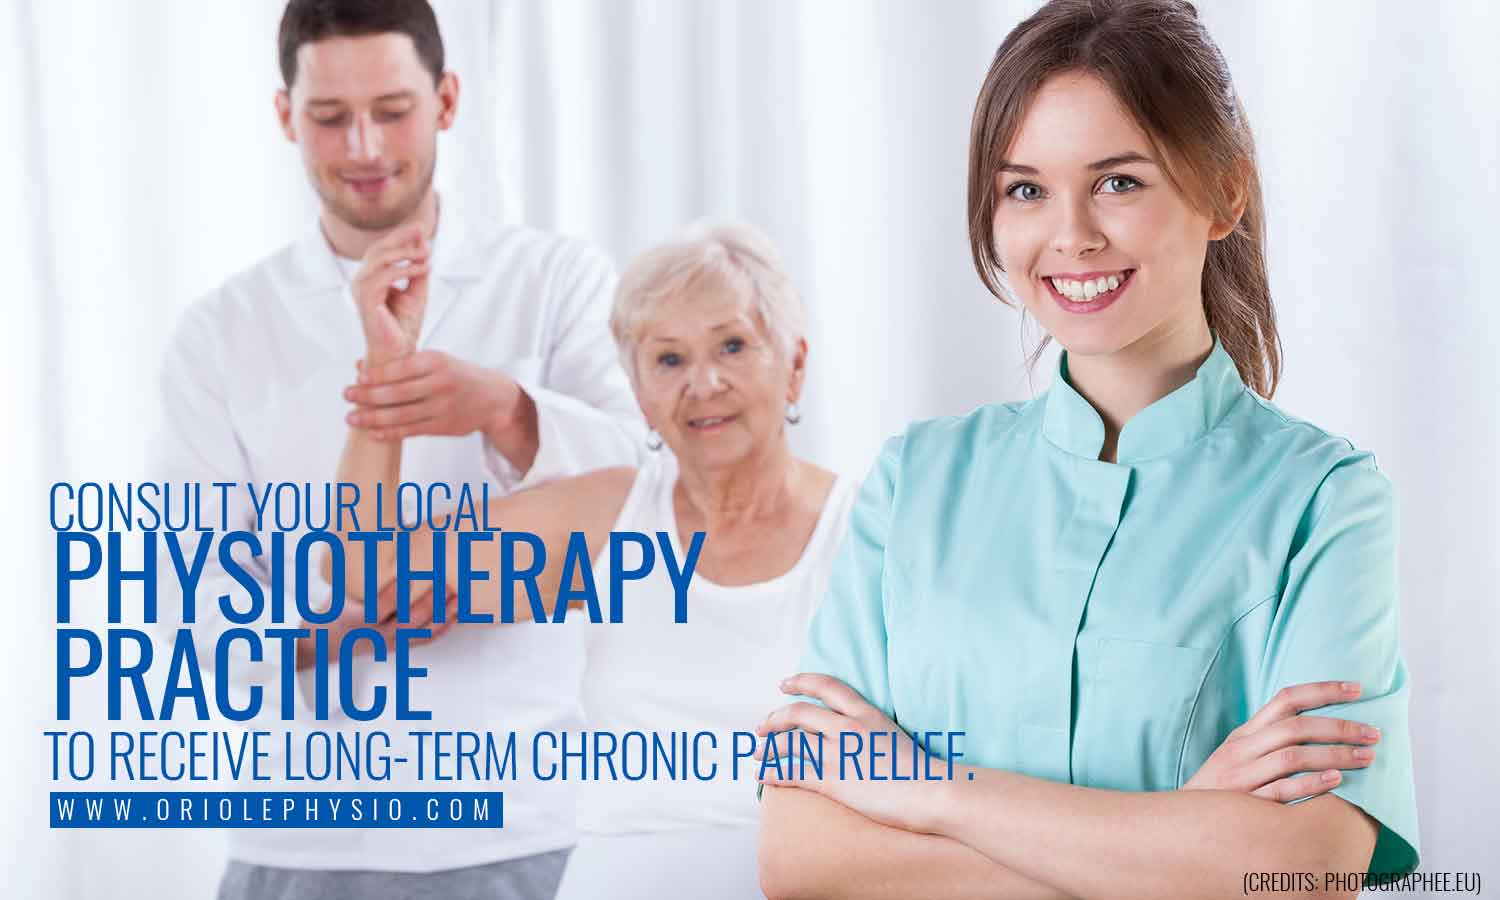 Consult your local physiotherapy practice to receive long-term chronic pain relief.